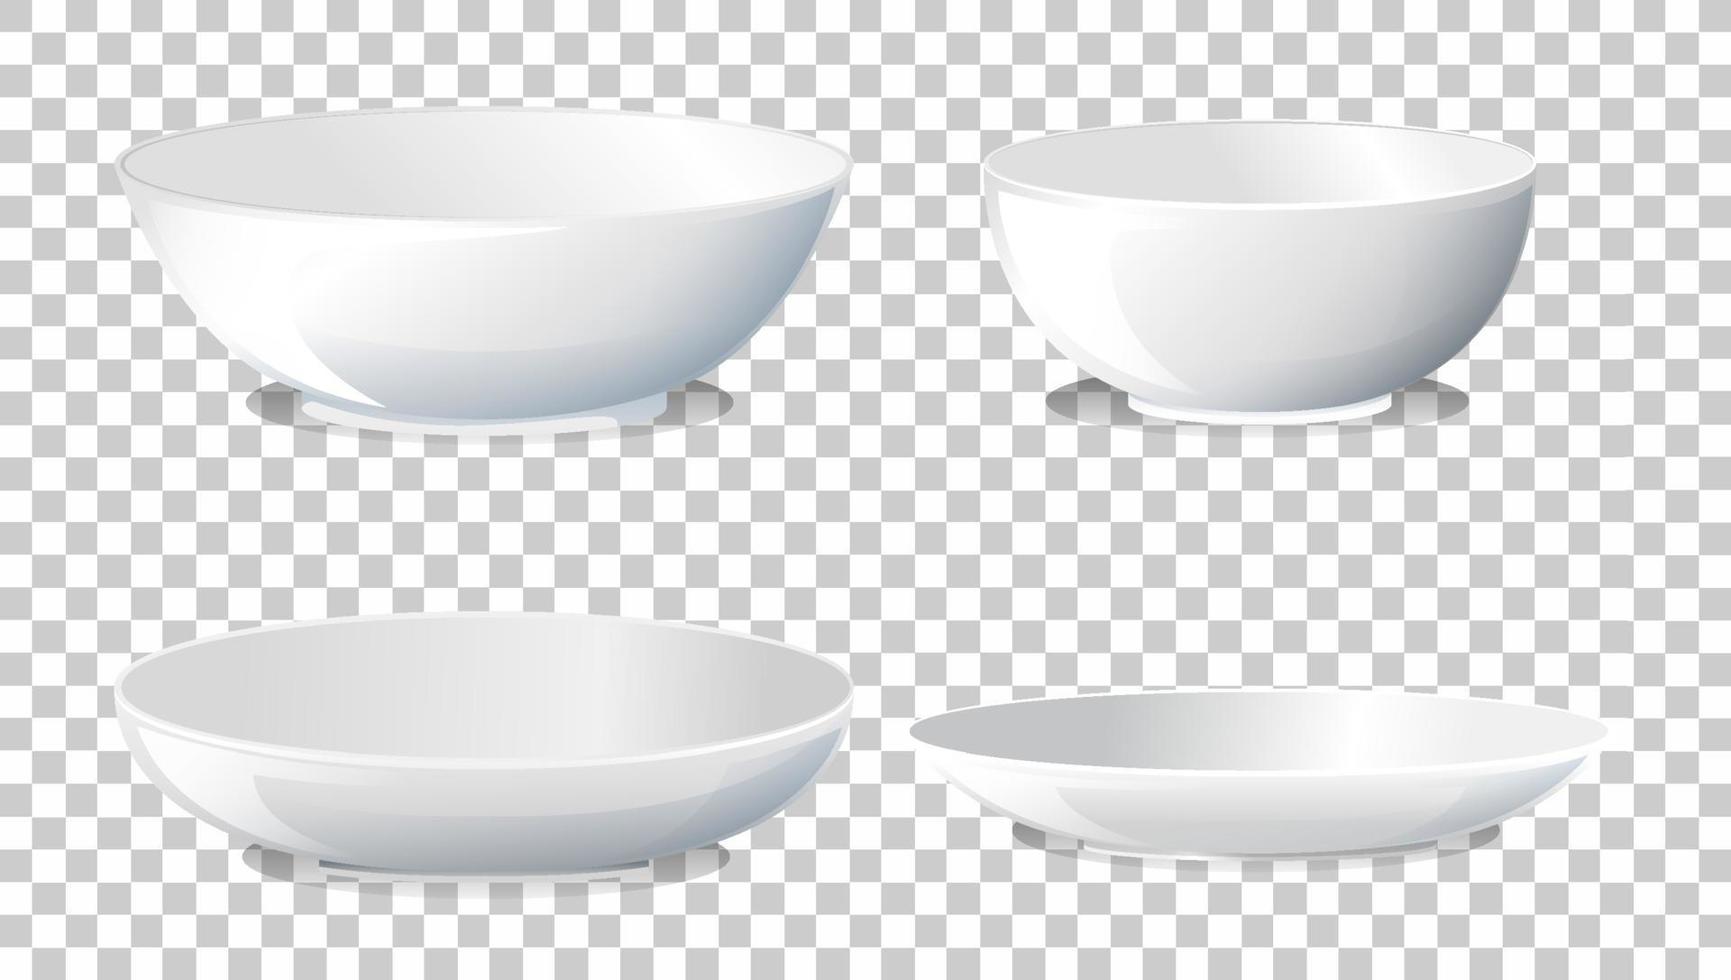 Set of white plain plate side view vector